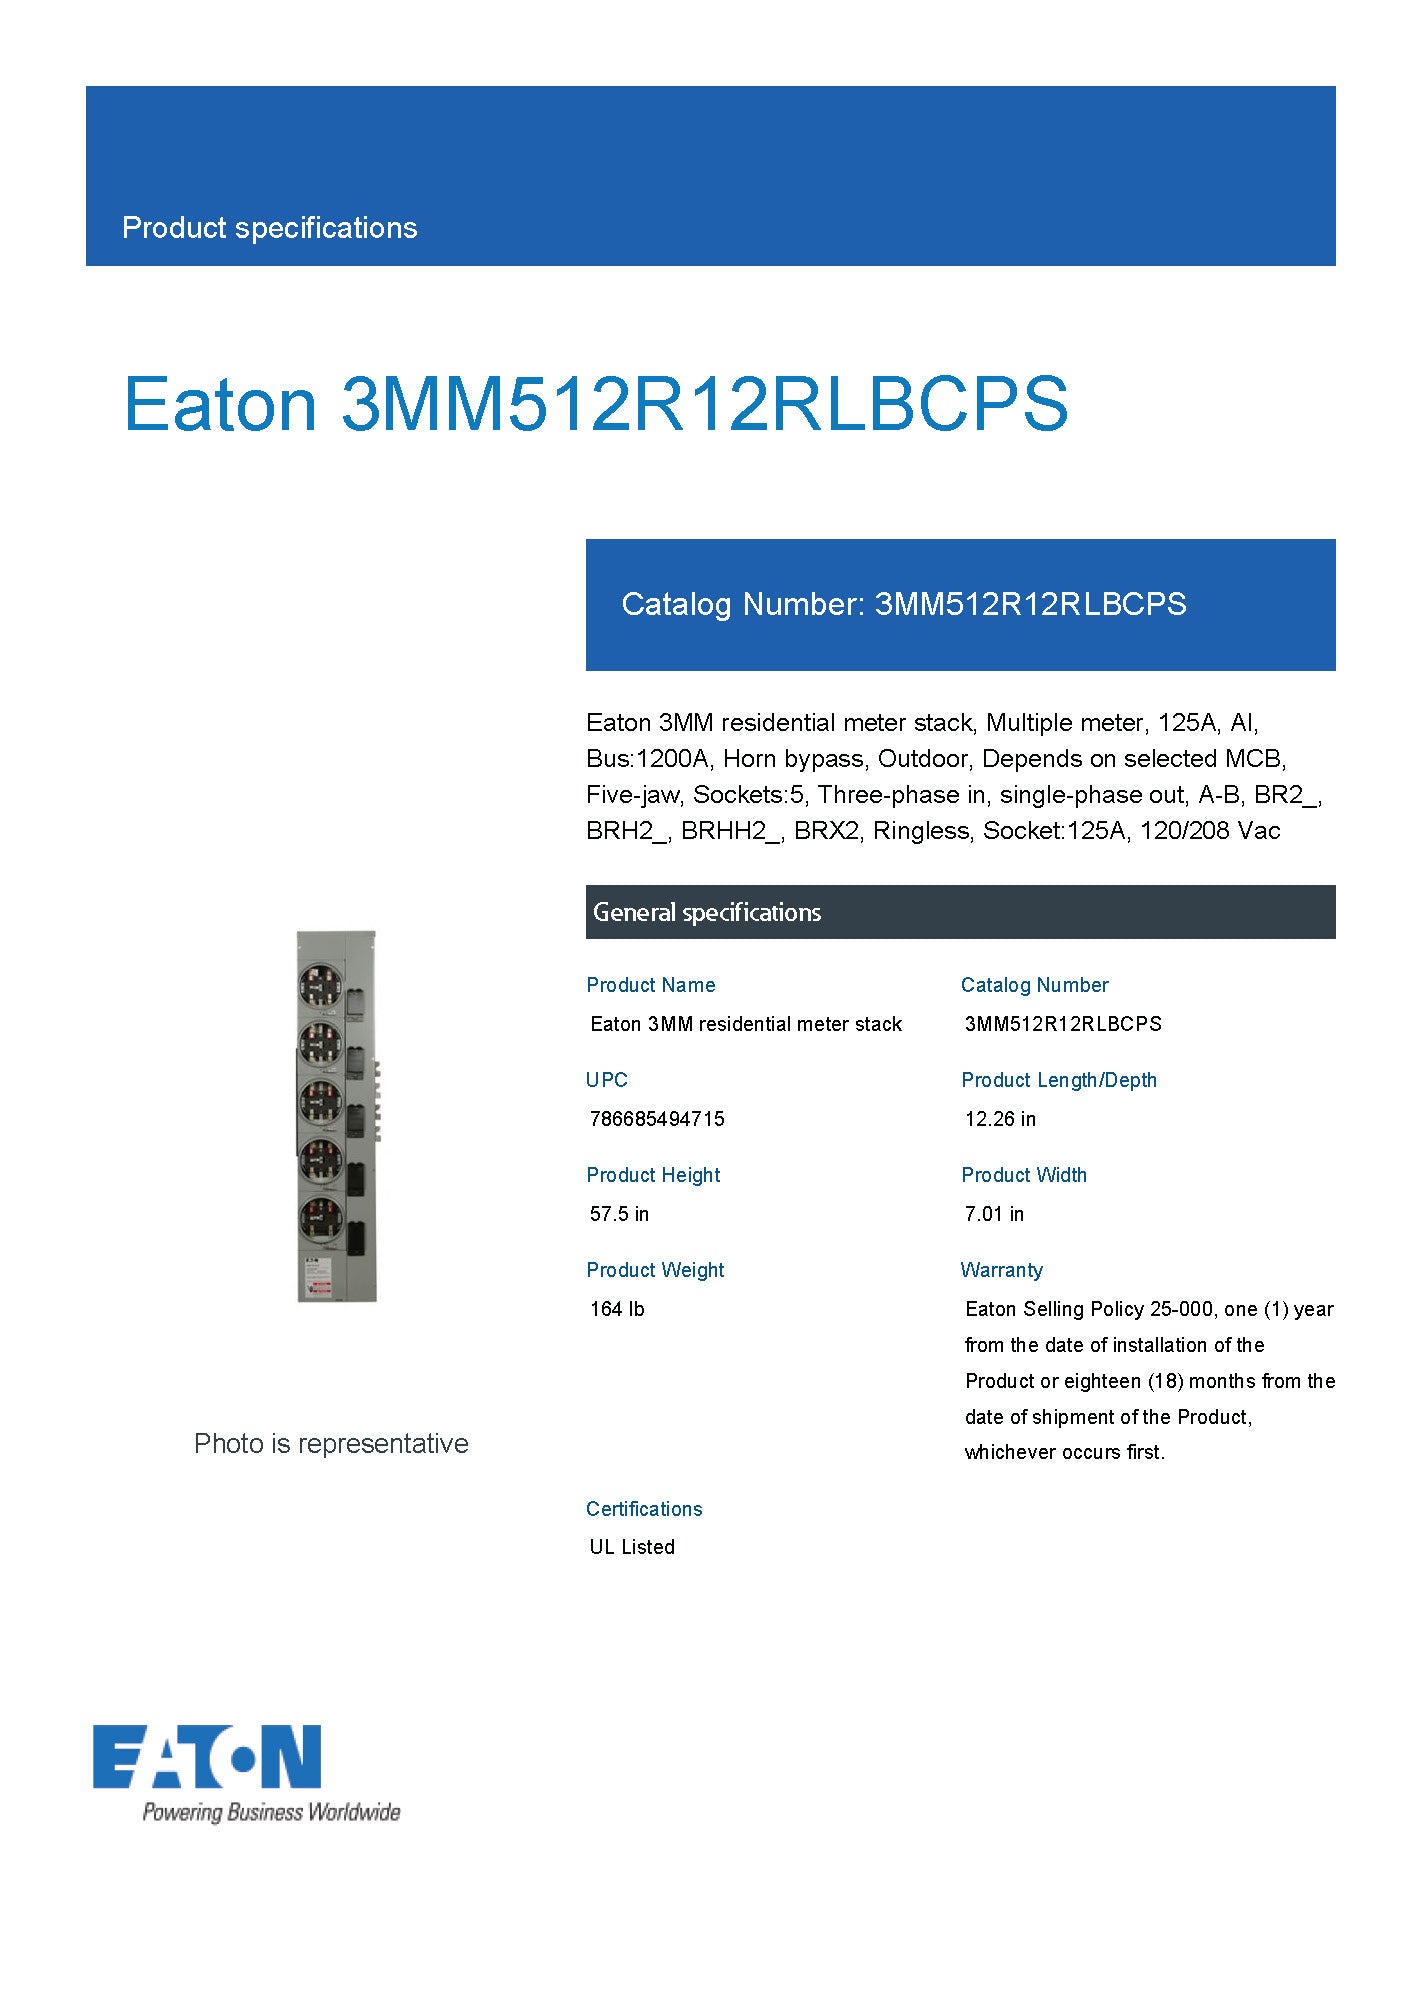 Eaton 3MM512R12RLBCPS (3MM512R12RLB) 3PH 5-Gang 1200A Bus 125A Socket Ringless Horn Bypass CPS Approved Meter Stack